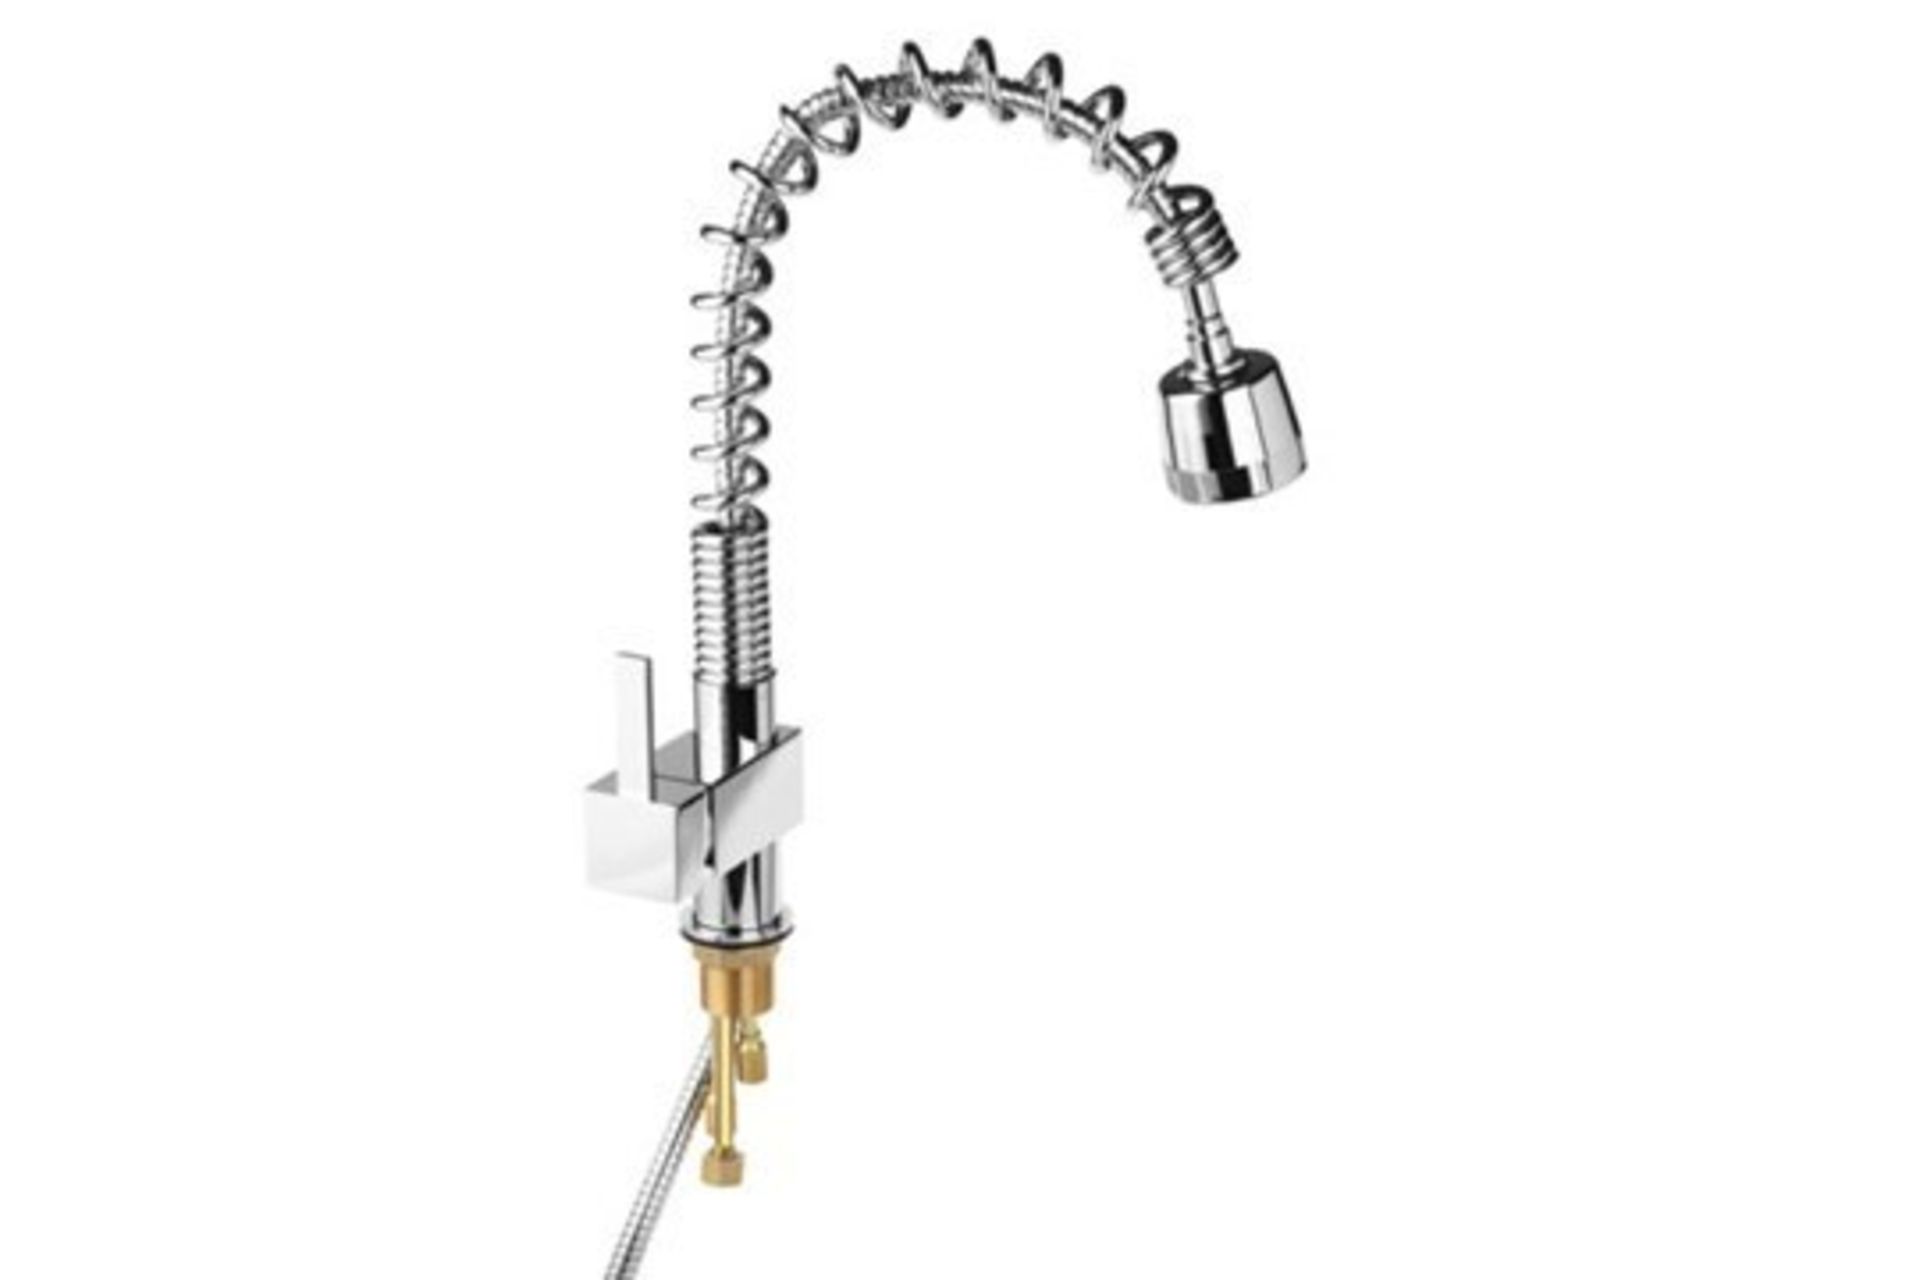 (LX56) Maddie Brushed Chrome Monobloc Kitchen Tap Swivel Pull Out Spray Mixer. RRP £219.99. - Image 2 of 2